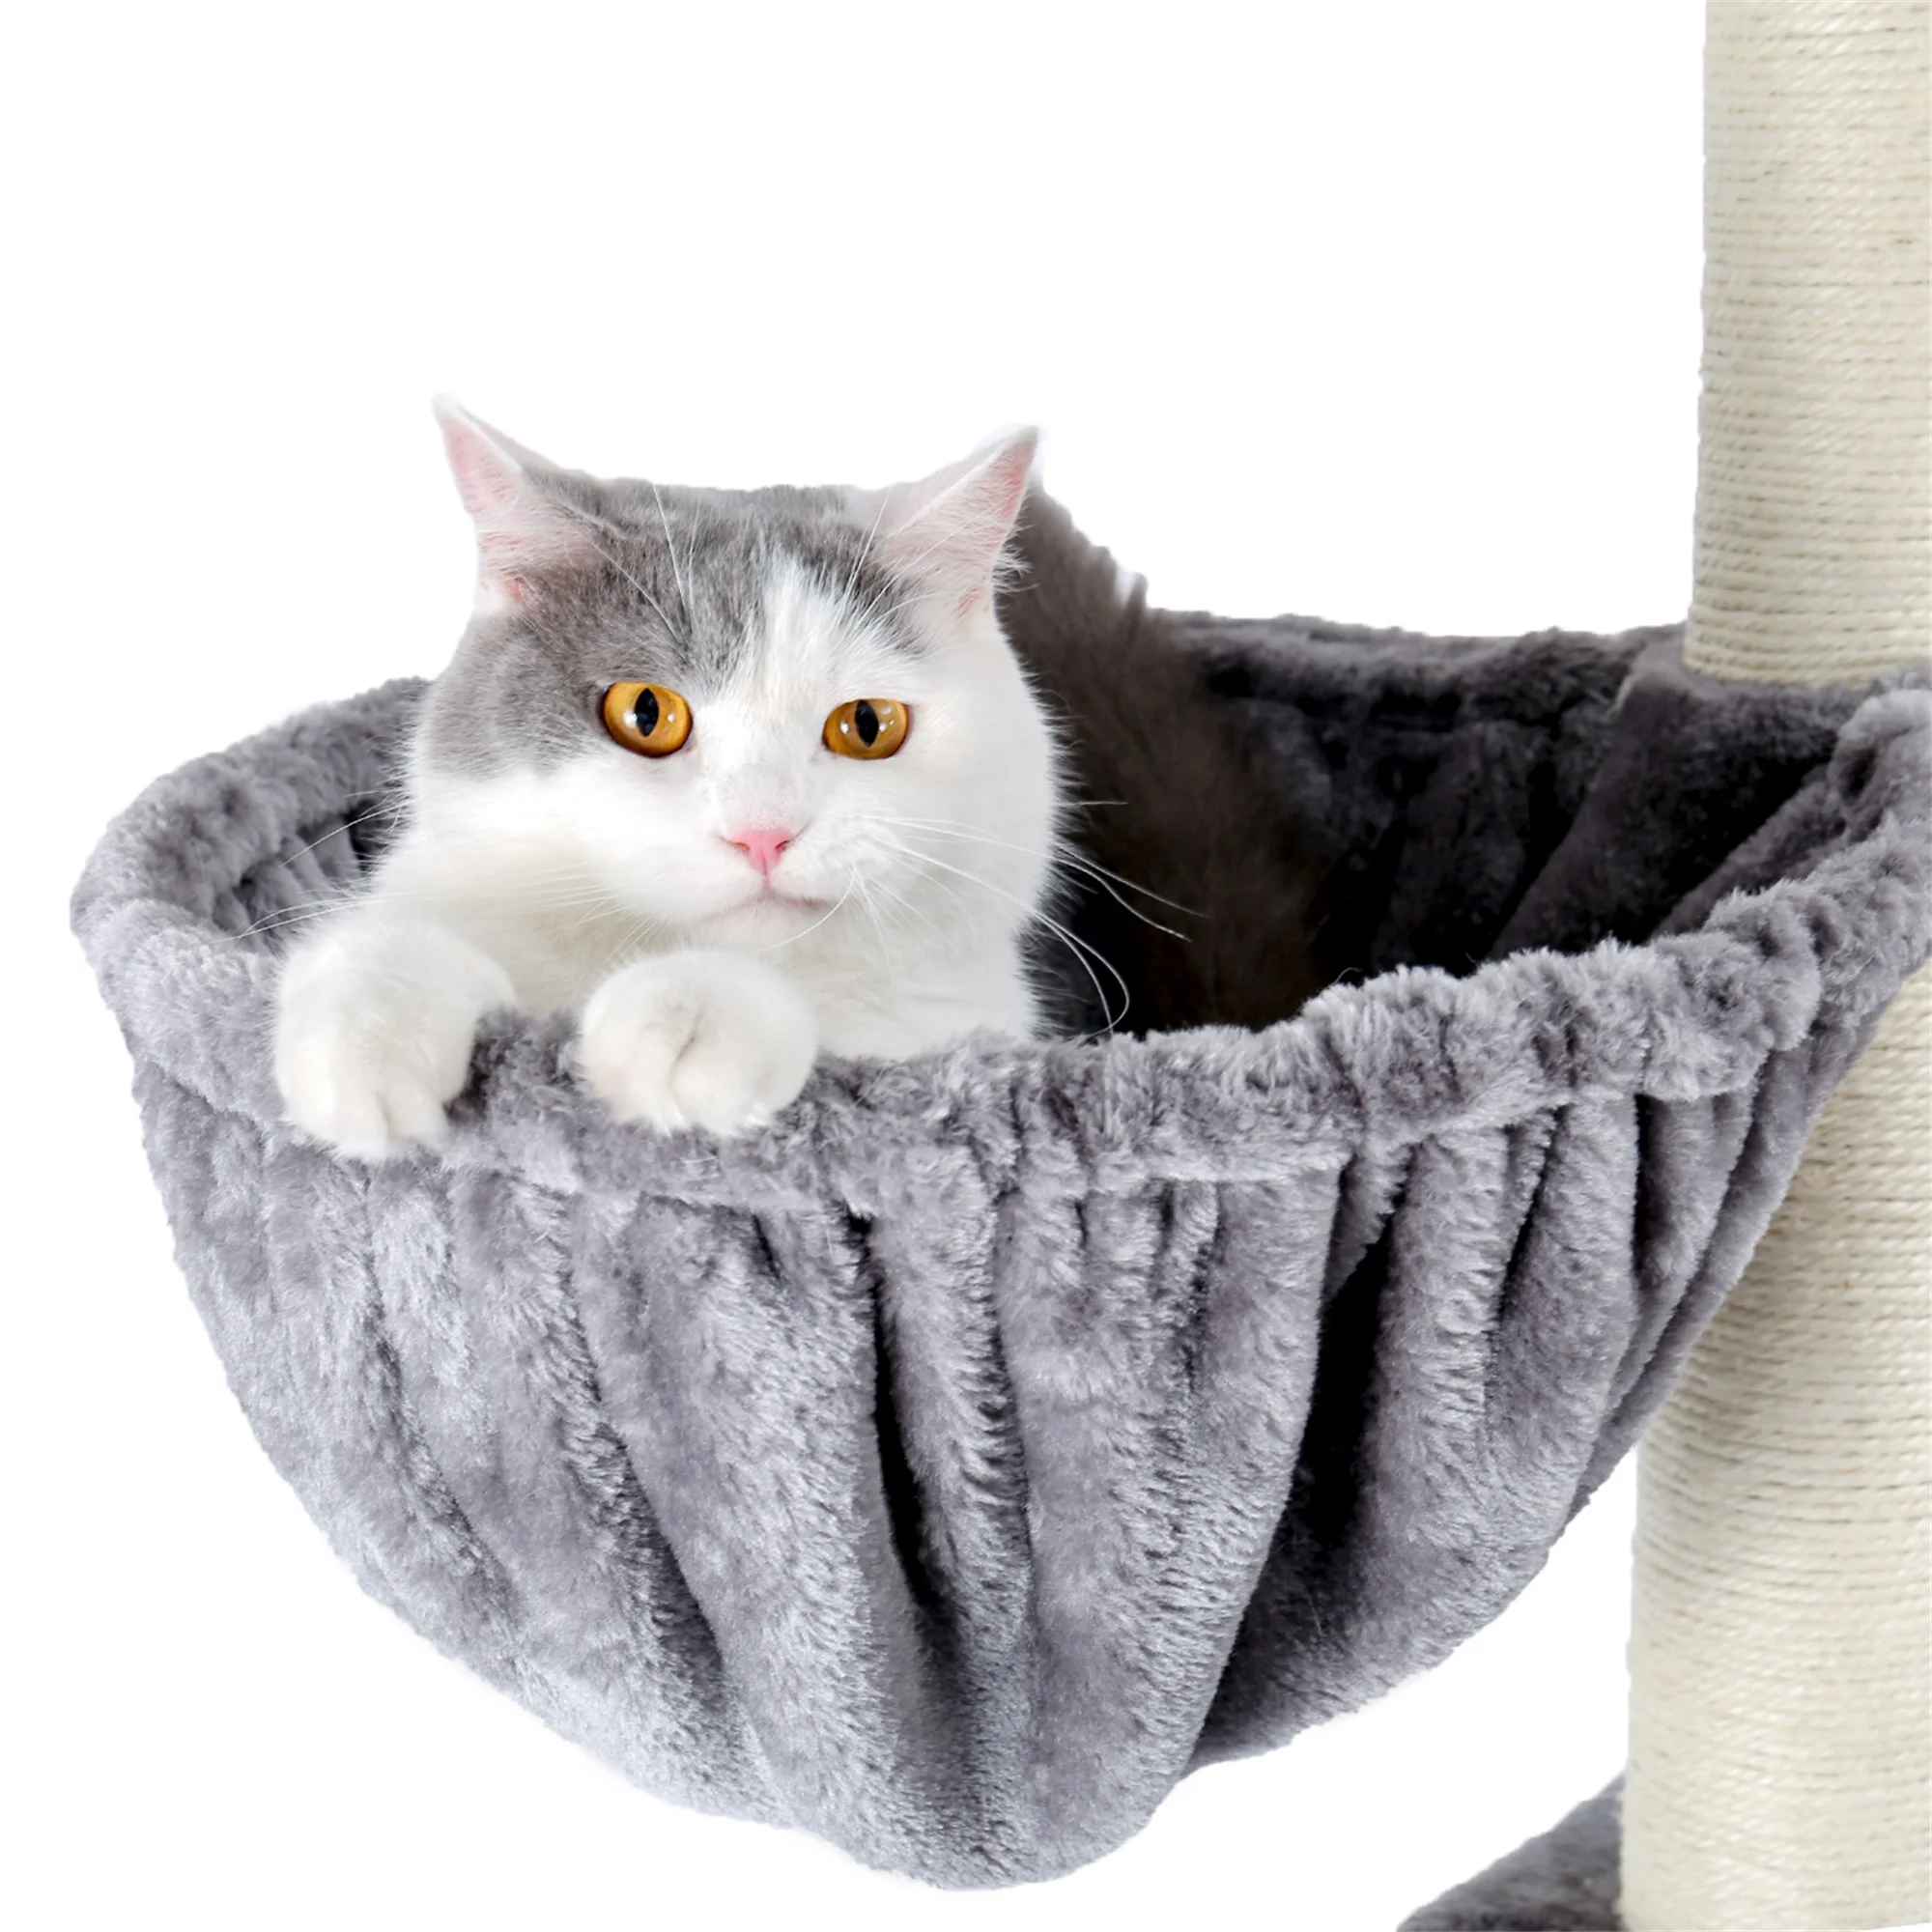 

Multi-Level Floor to Ceiling Cat Tree Tall Cat Tower with Sisal-Covered Scratching Posts, 2 Super Large Condos, Adjustable Heigh, Grey